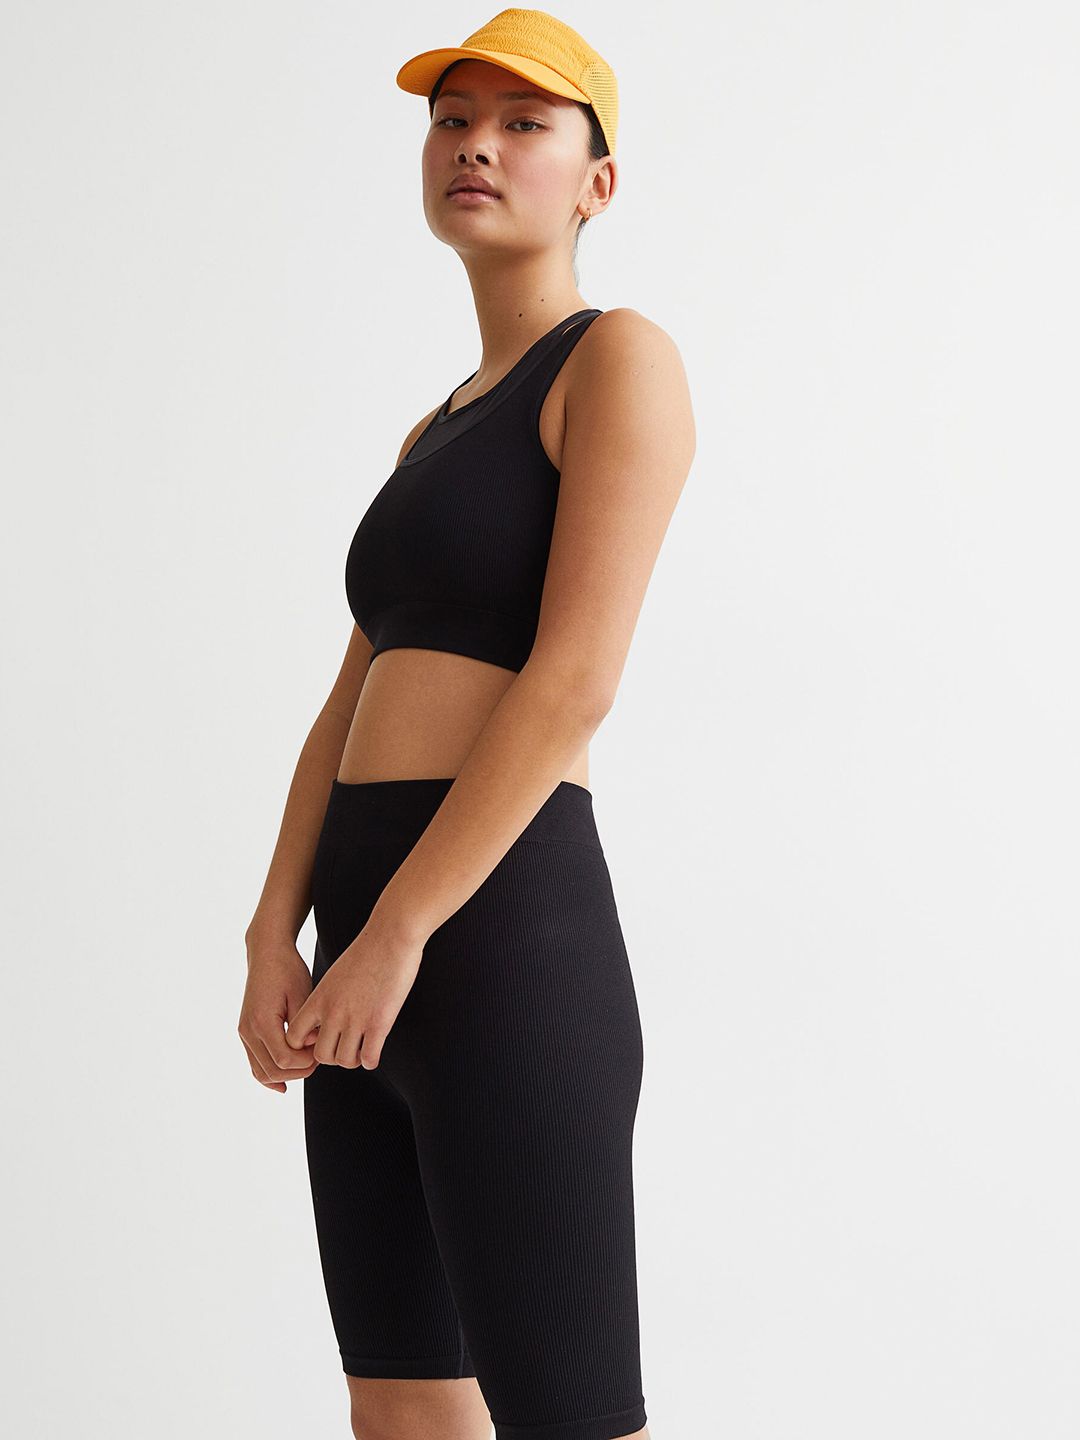 H&M Women Black Seamless Sports Cycling Shorts Price in India